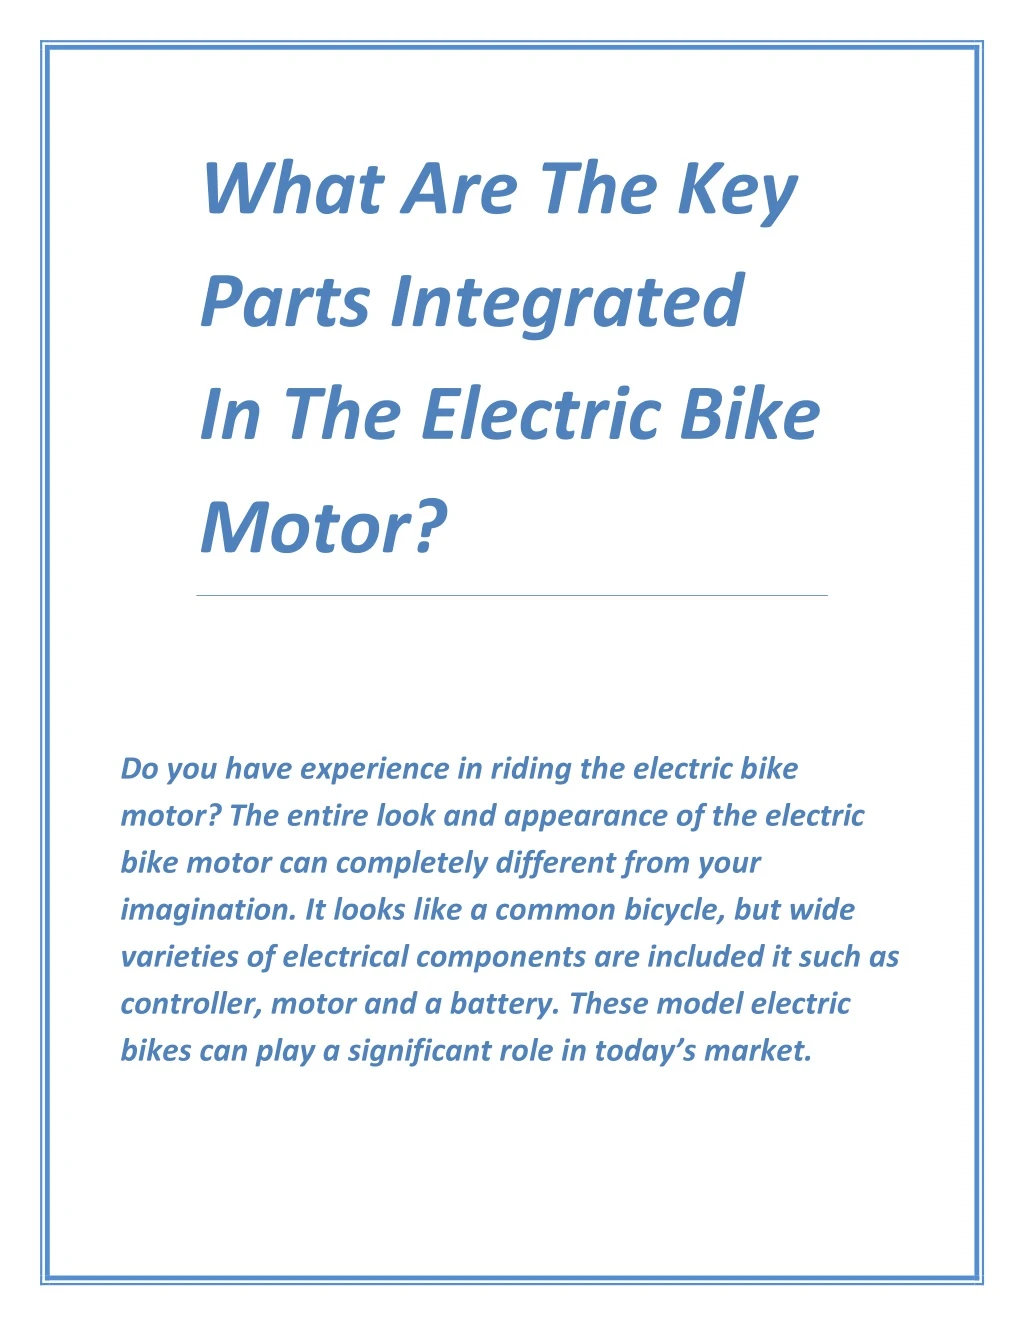 what are the key parts integrated in the electric